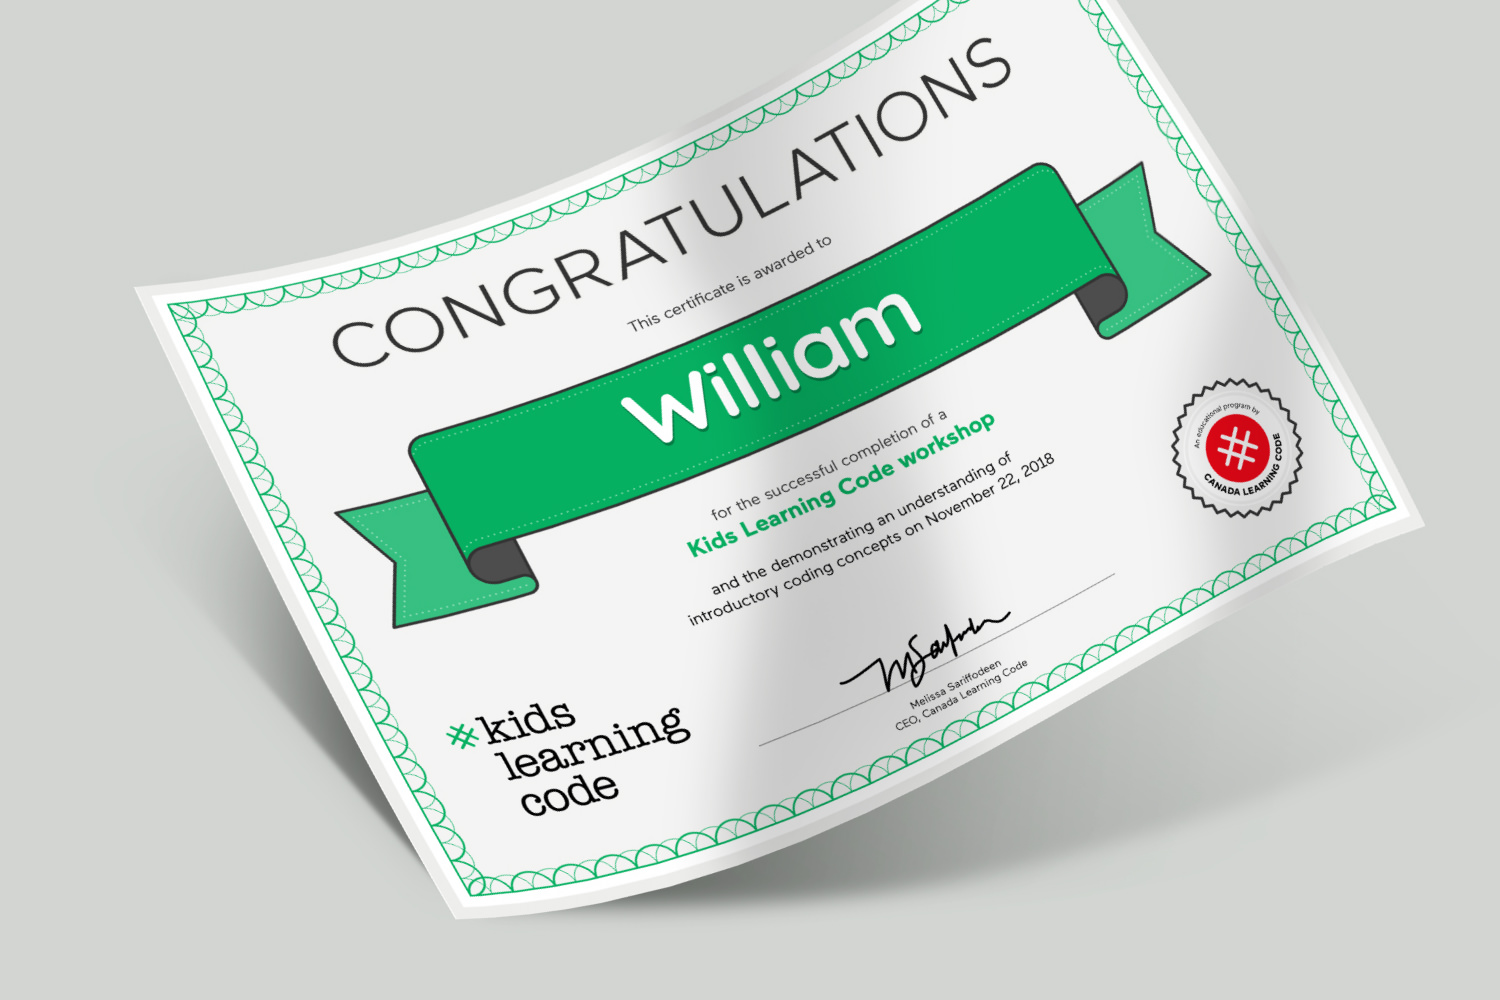 Printed certificate design featuring the Kids Learning Code program logo and Canada Learning Code logo